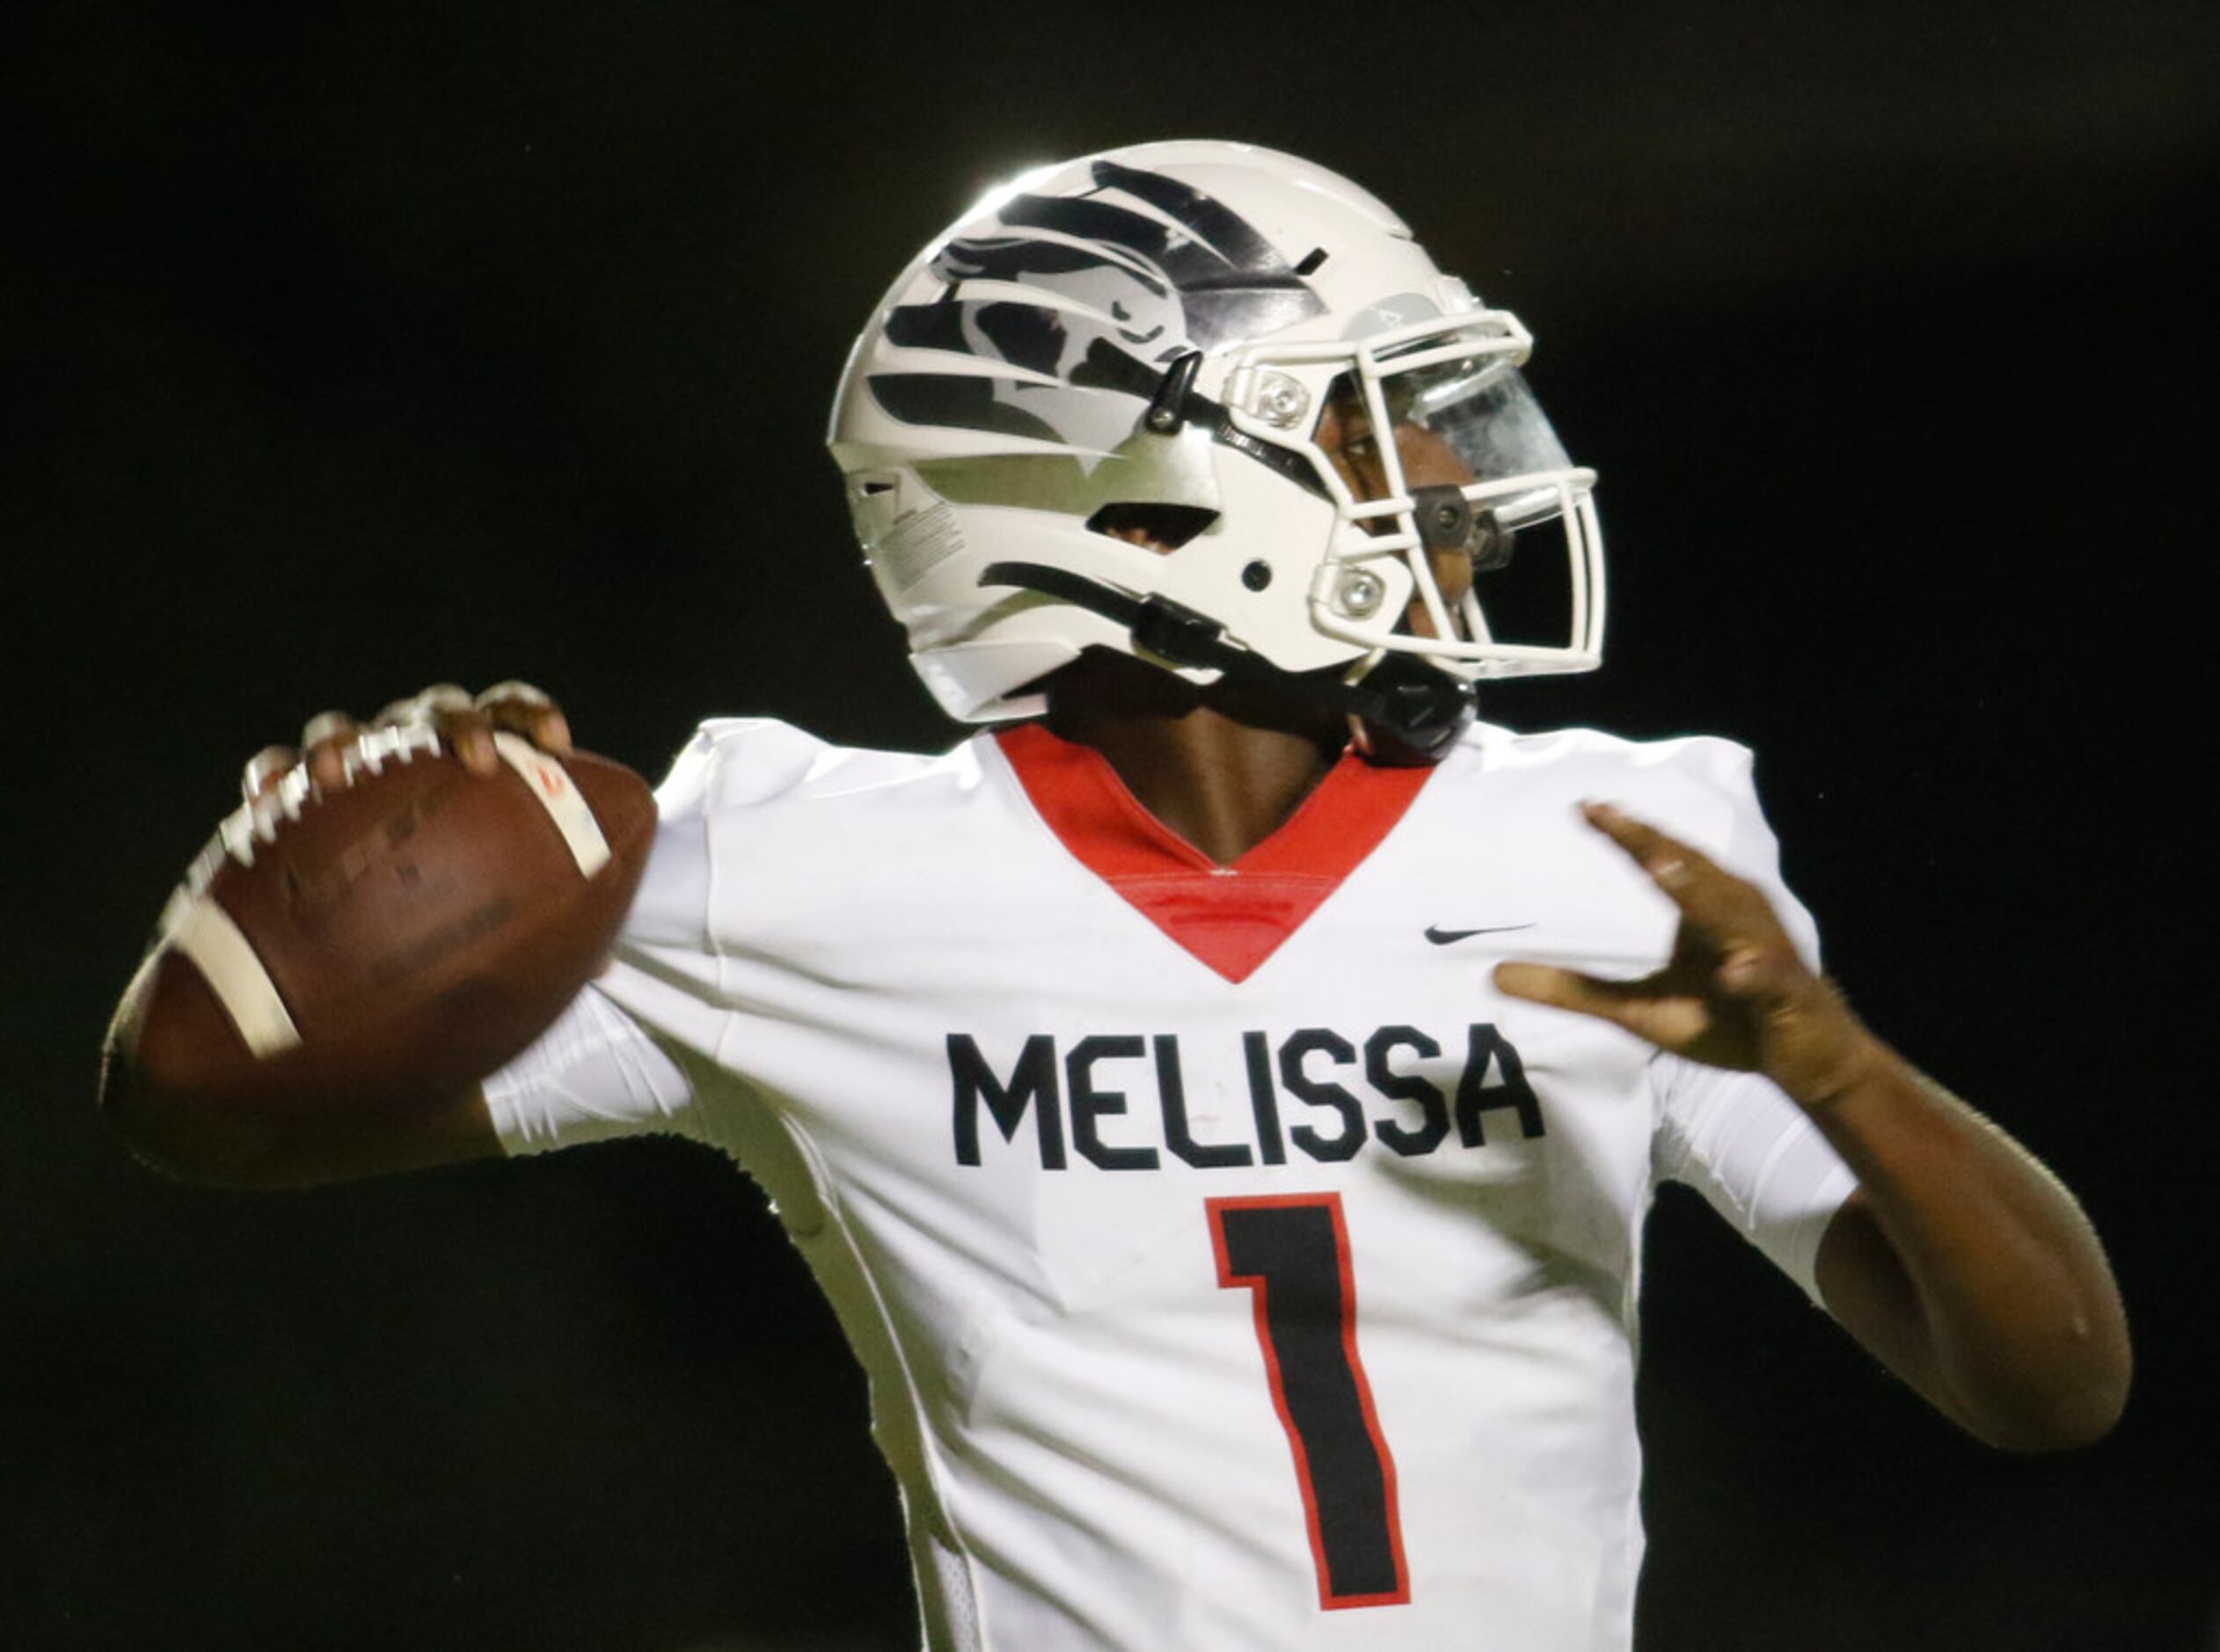 Melissa quarterback Brendon Lewis (1) launches a pass downfield during first half action...